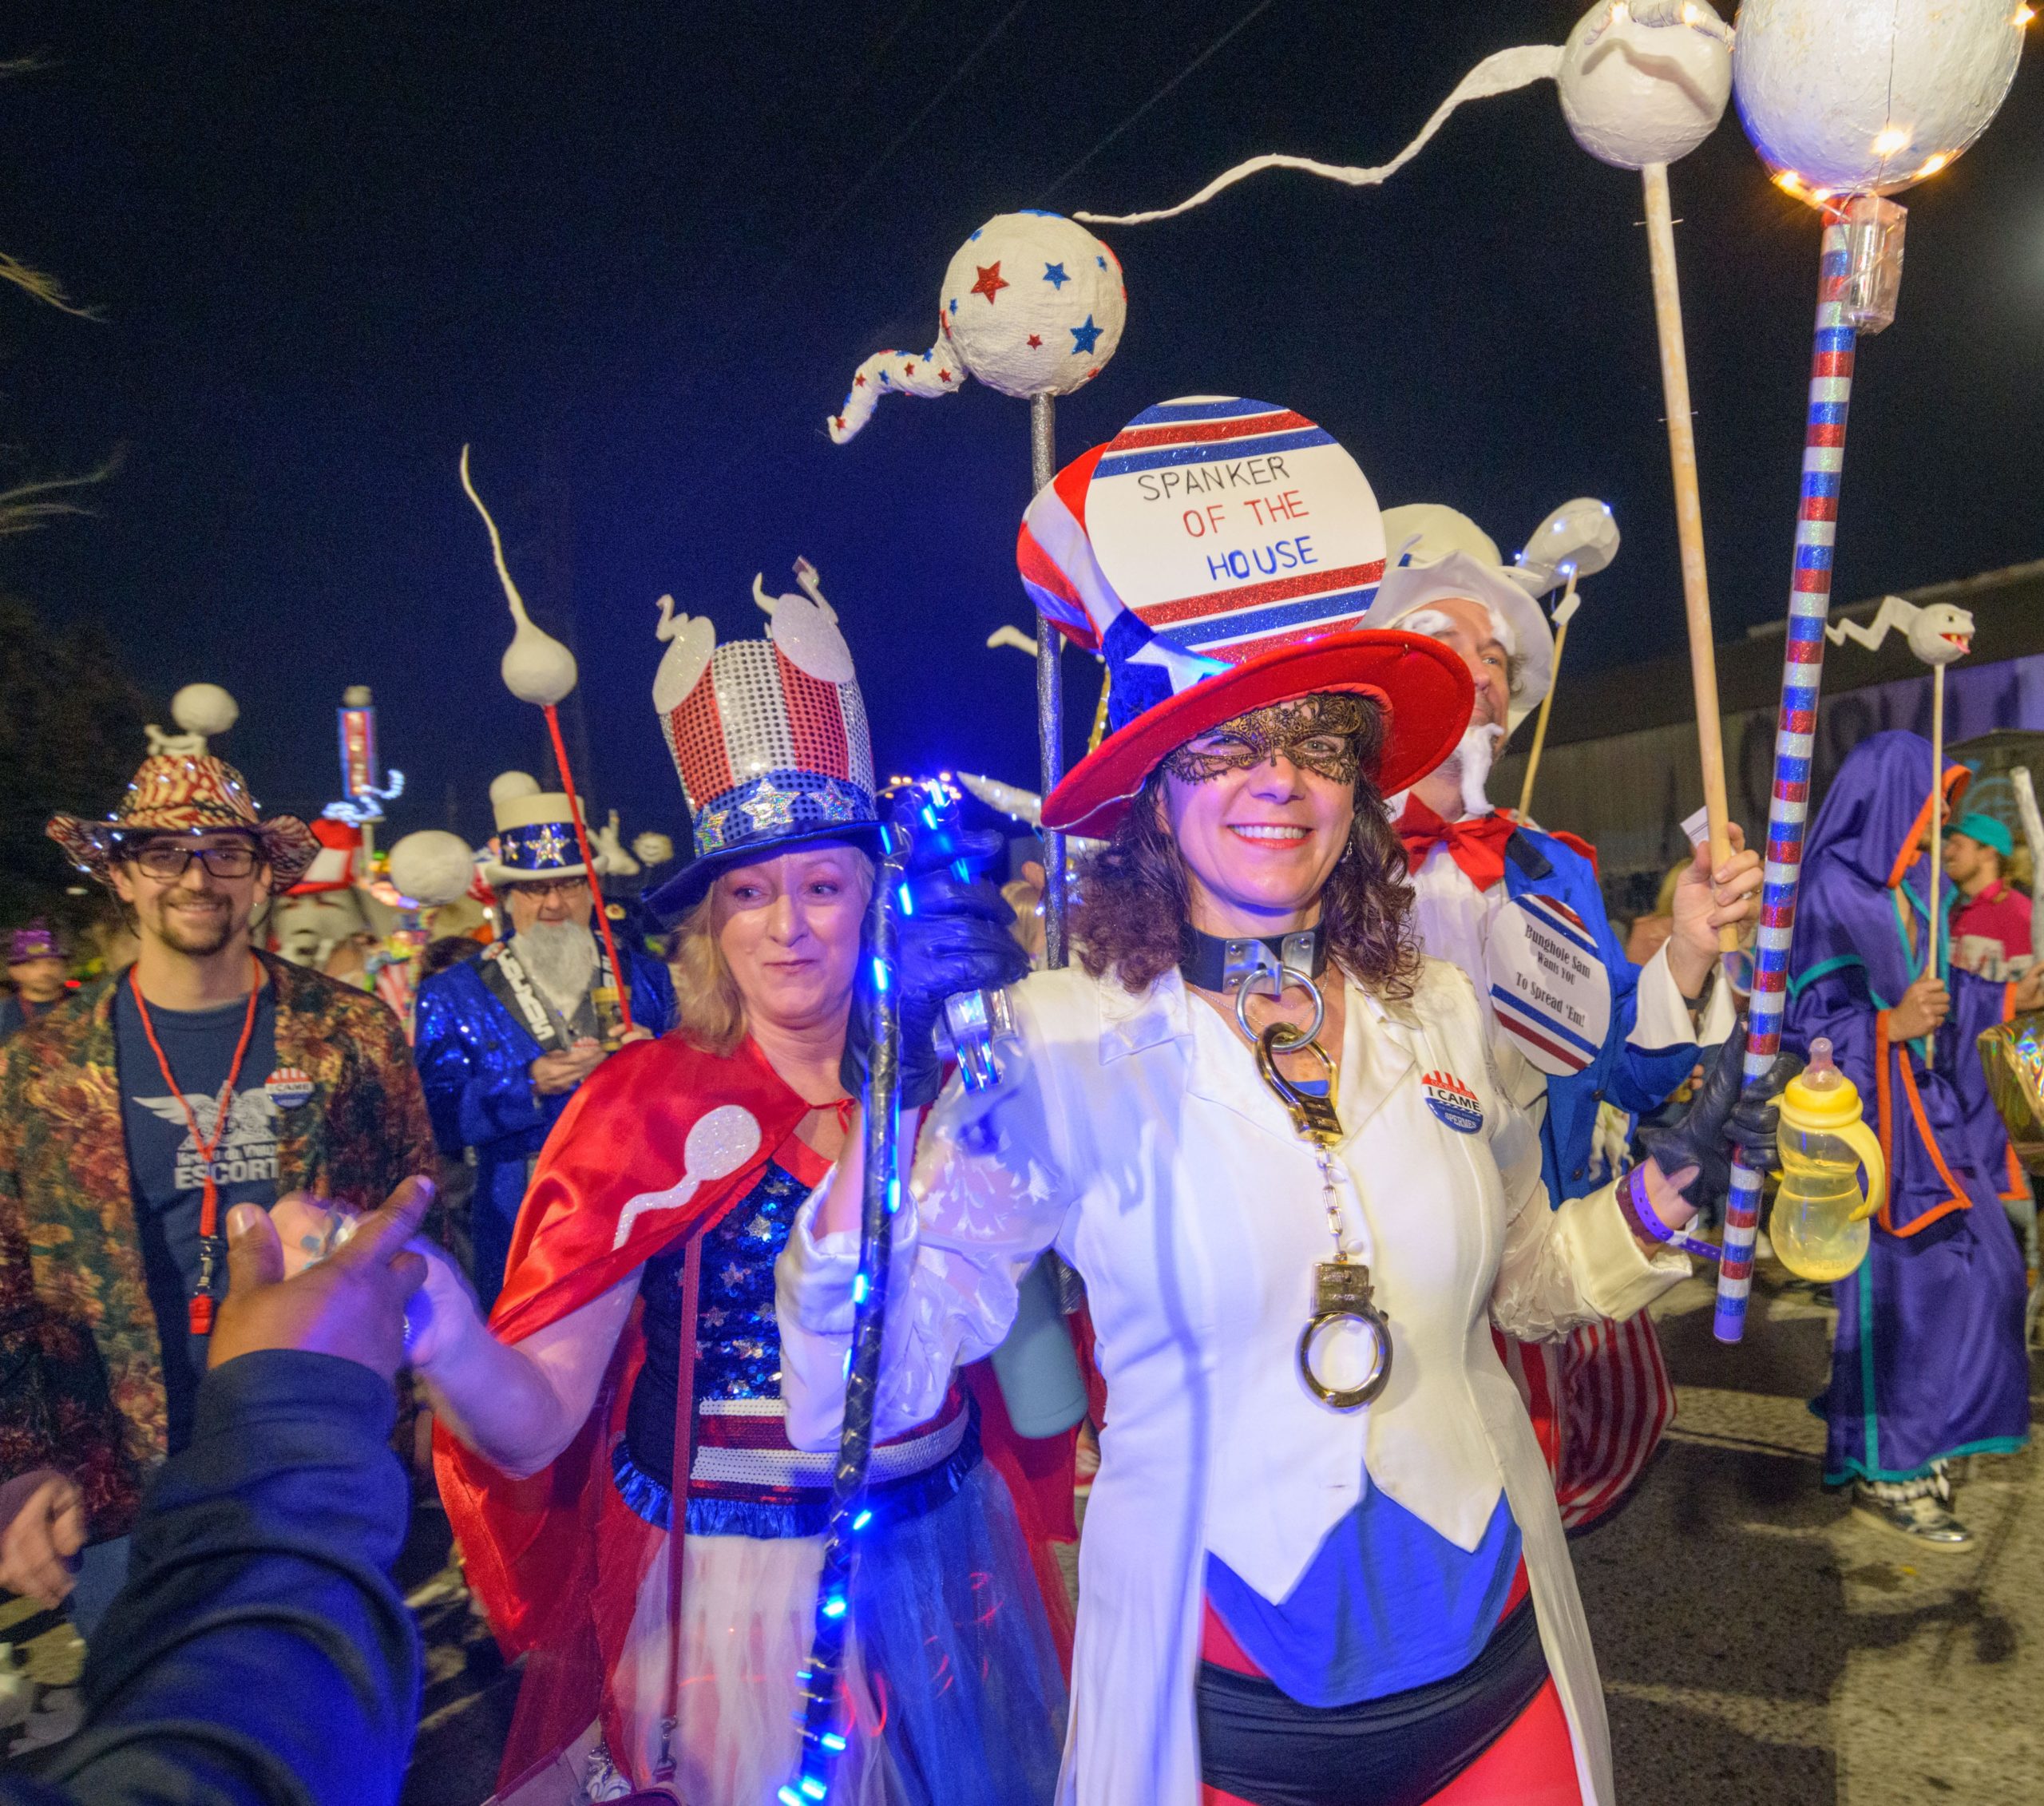 Harry Shearer reigns again as King Plenipotentiary; Captain of New Orleans for Krewedelusion’s "Hard Rock the Boat" theme, while Krewe du Vieux kicks of the election season with the theme "Erection 2020" and Queen B.B. St. Roman, of the#NOPD Homeless assistance unit. The Krewe du Vieux parody parade skewers political figures and pop-culture and is often NSFW (Not Safe For Work). The parade starts in the Bywater before heading through the Marigny and French Quarter. Sub-krewes include the Krewe of C.R.U.D.E., Krewe of Space Age Love, Krewe of Underwear, Seeds of Decline, Krewe of Mama Roux, Krewe of L.E.W.D., Krewe of Drips and Dis- charges, Krewe of K.A.O.S., Knights of Mondu, T.O.K.I.N., Krewe Rue Bourbon, Krewe de C.R.A.P.S., Mystic Krewe of Spermes, Mystic Krewe of Comatose, Mystic Krewe of Inane, Krewe du Mishigas and Krewe of SPANK. Krewedelusion featured The Laissez Boys of New Orleans shall serve as the King Plenipotentiary’s Royal Honor Guard;and the enlightened participants in the procession comprise krewedelusion’s Innerkrewes: The AlKreweists; Krewe of Bananas; Krewe de Mayahuel; Krewe du Jieux; The Baby Dolls; Krewe de Libertas; Her Royal Heinie; The Pony Girls; Krewe du Moi; Krewe du Fool; Krewe du Sue; The L Train Brass Band Krewe; … and Boleyns; Krewe de Seuss and the interactive recycling Krewe: The Trashformers! Photo by Matthew Hinton